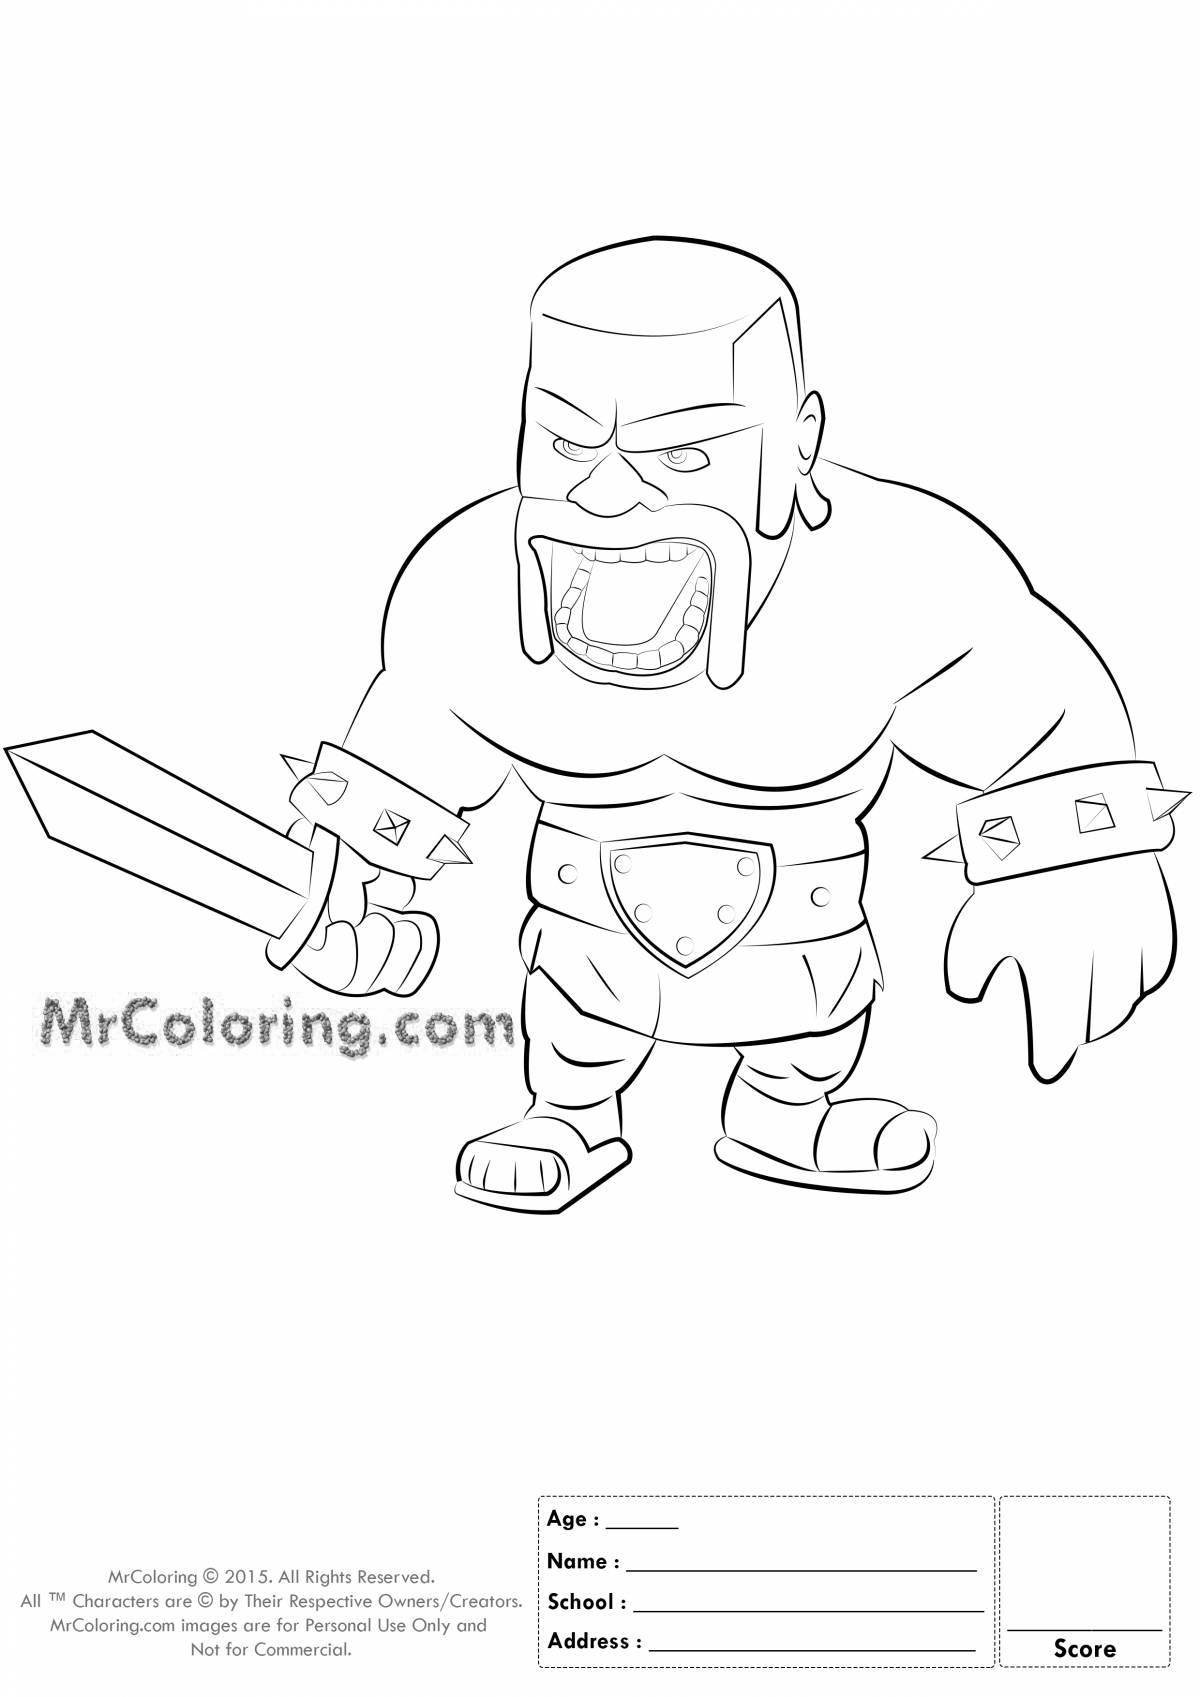 Playful clash royale arena coloring page